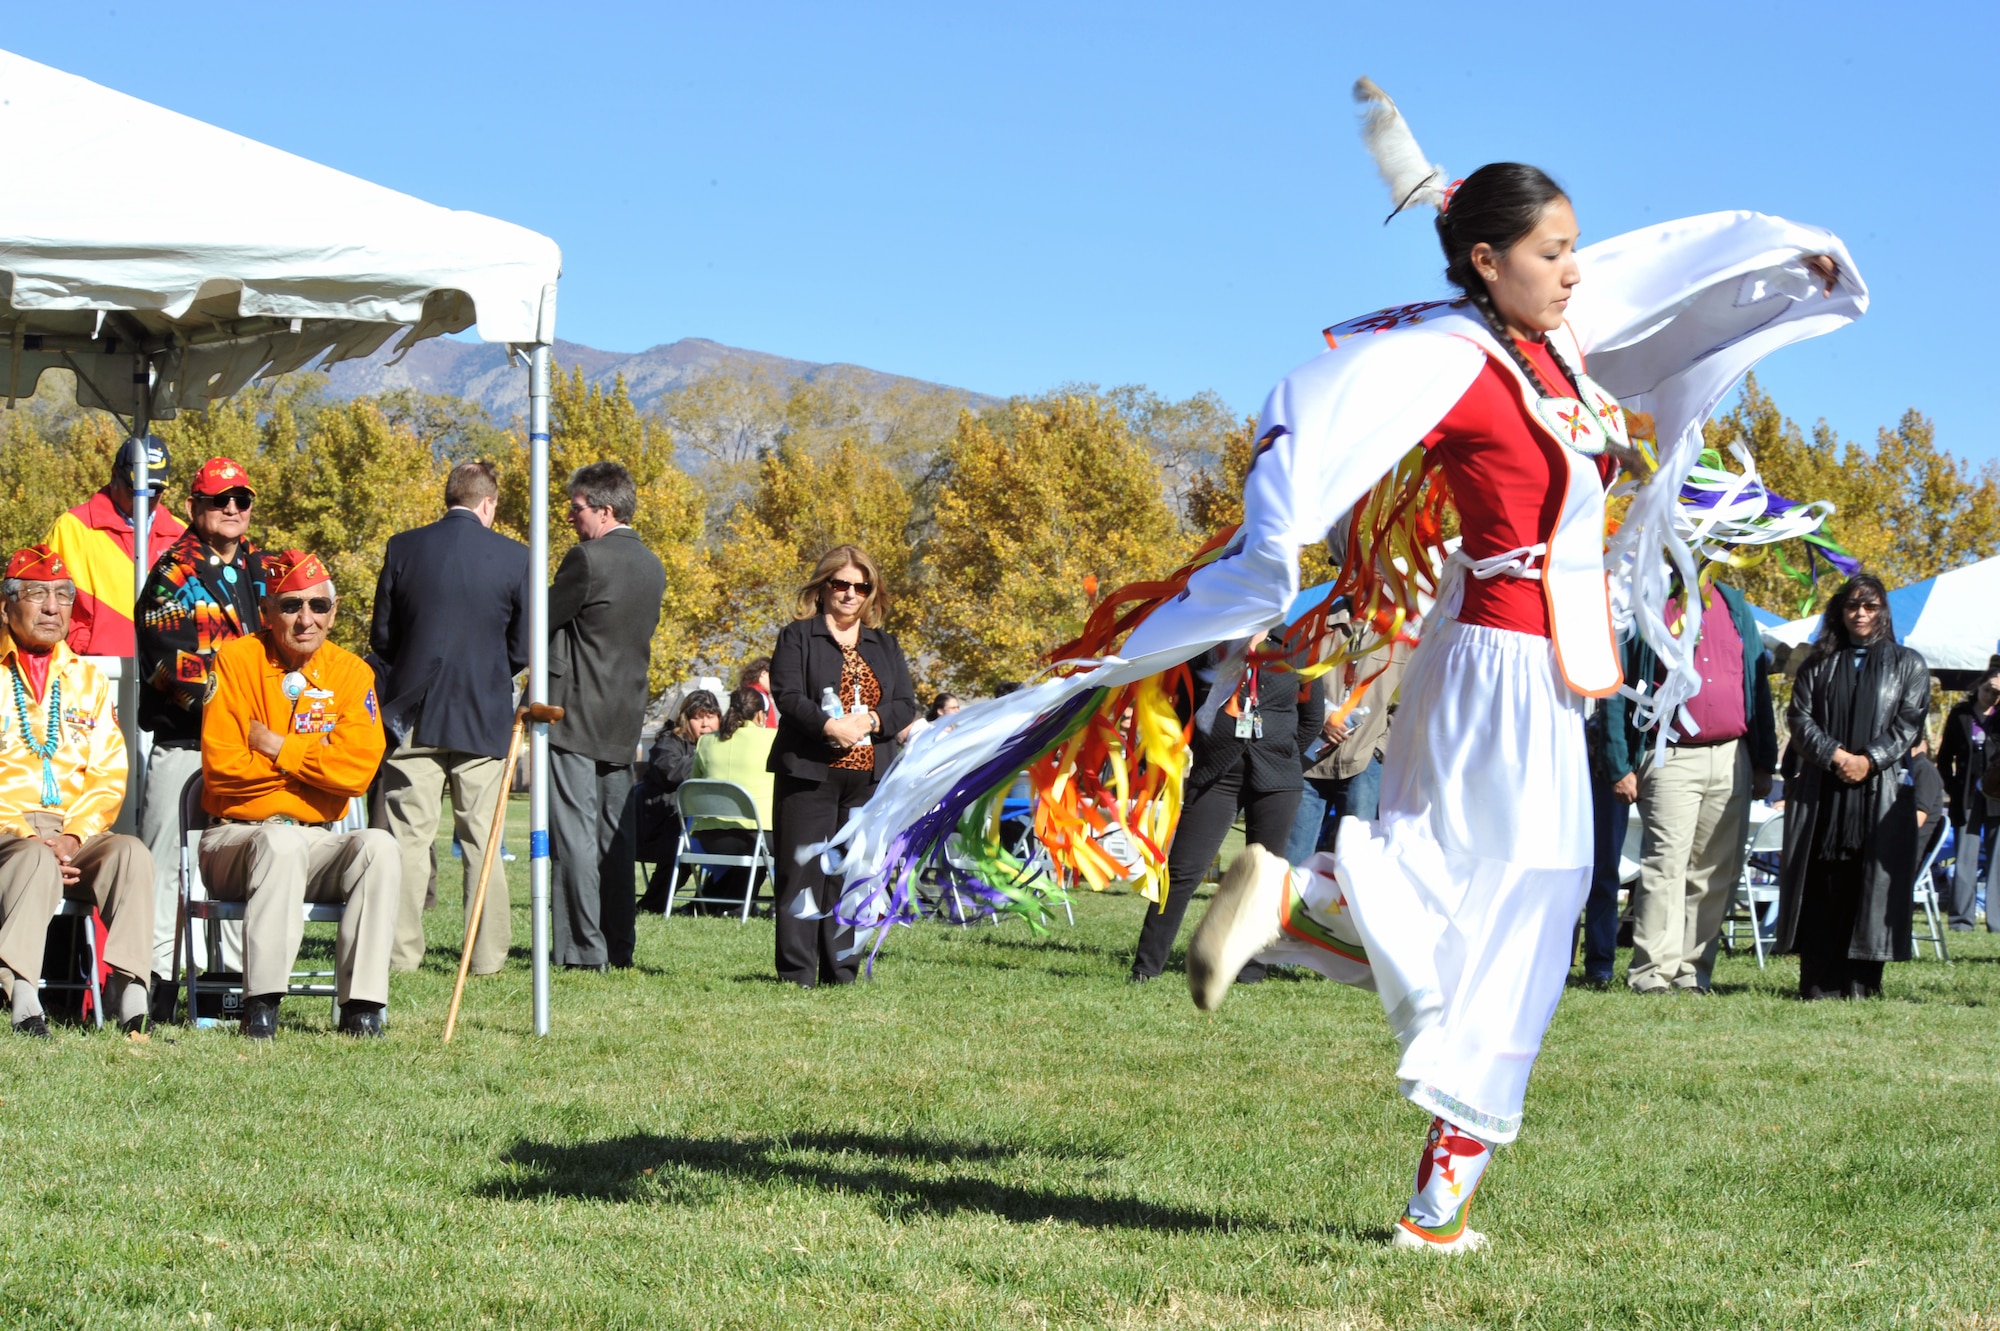 Alilee Bah Church, performs a traditional Native American butterfly dance during a ceremony Nov. 10, 2010, at Kirtland Air Force Base, N.M., honoring veterans and celebrating Native American Heritage Month. (U.S. Air Force photo)